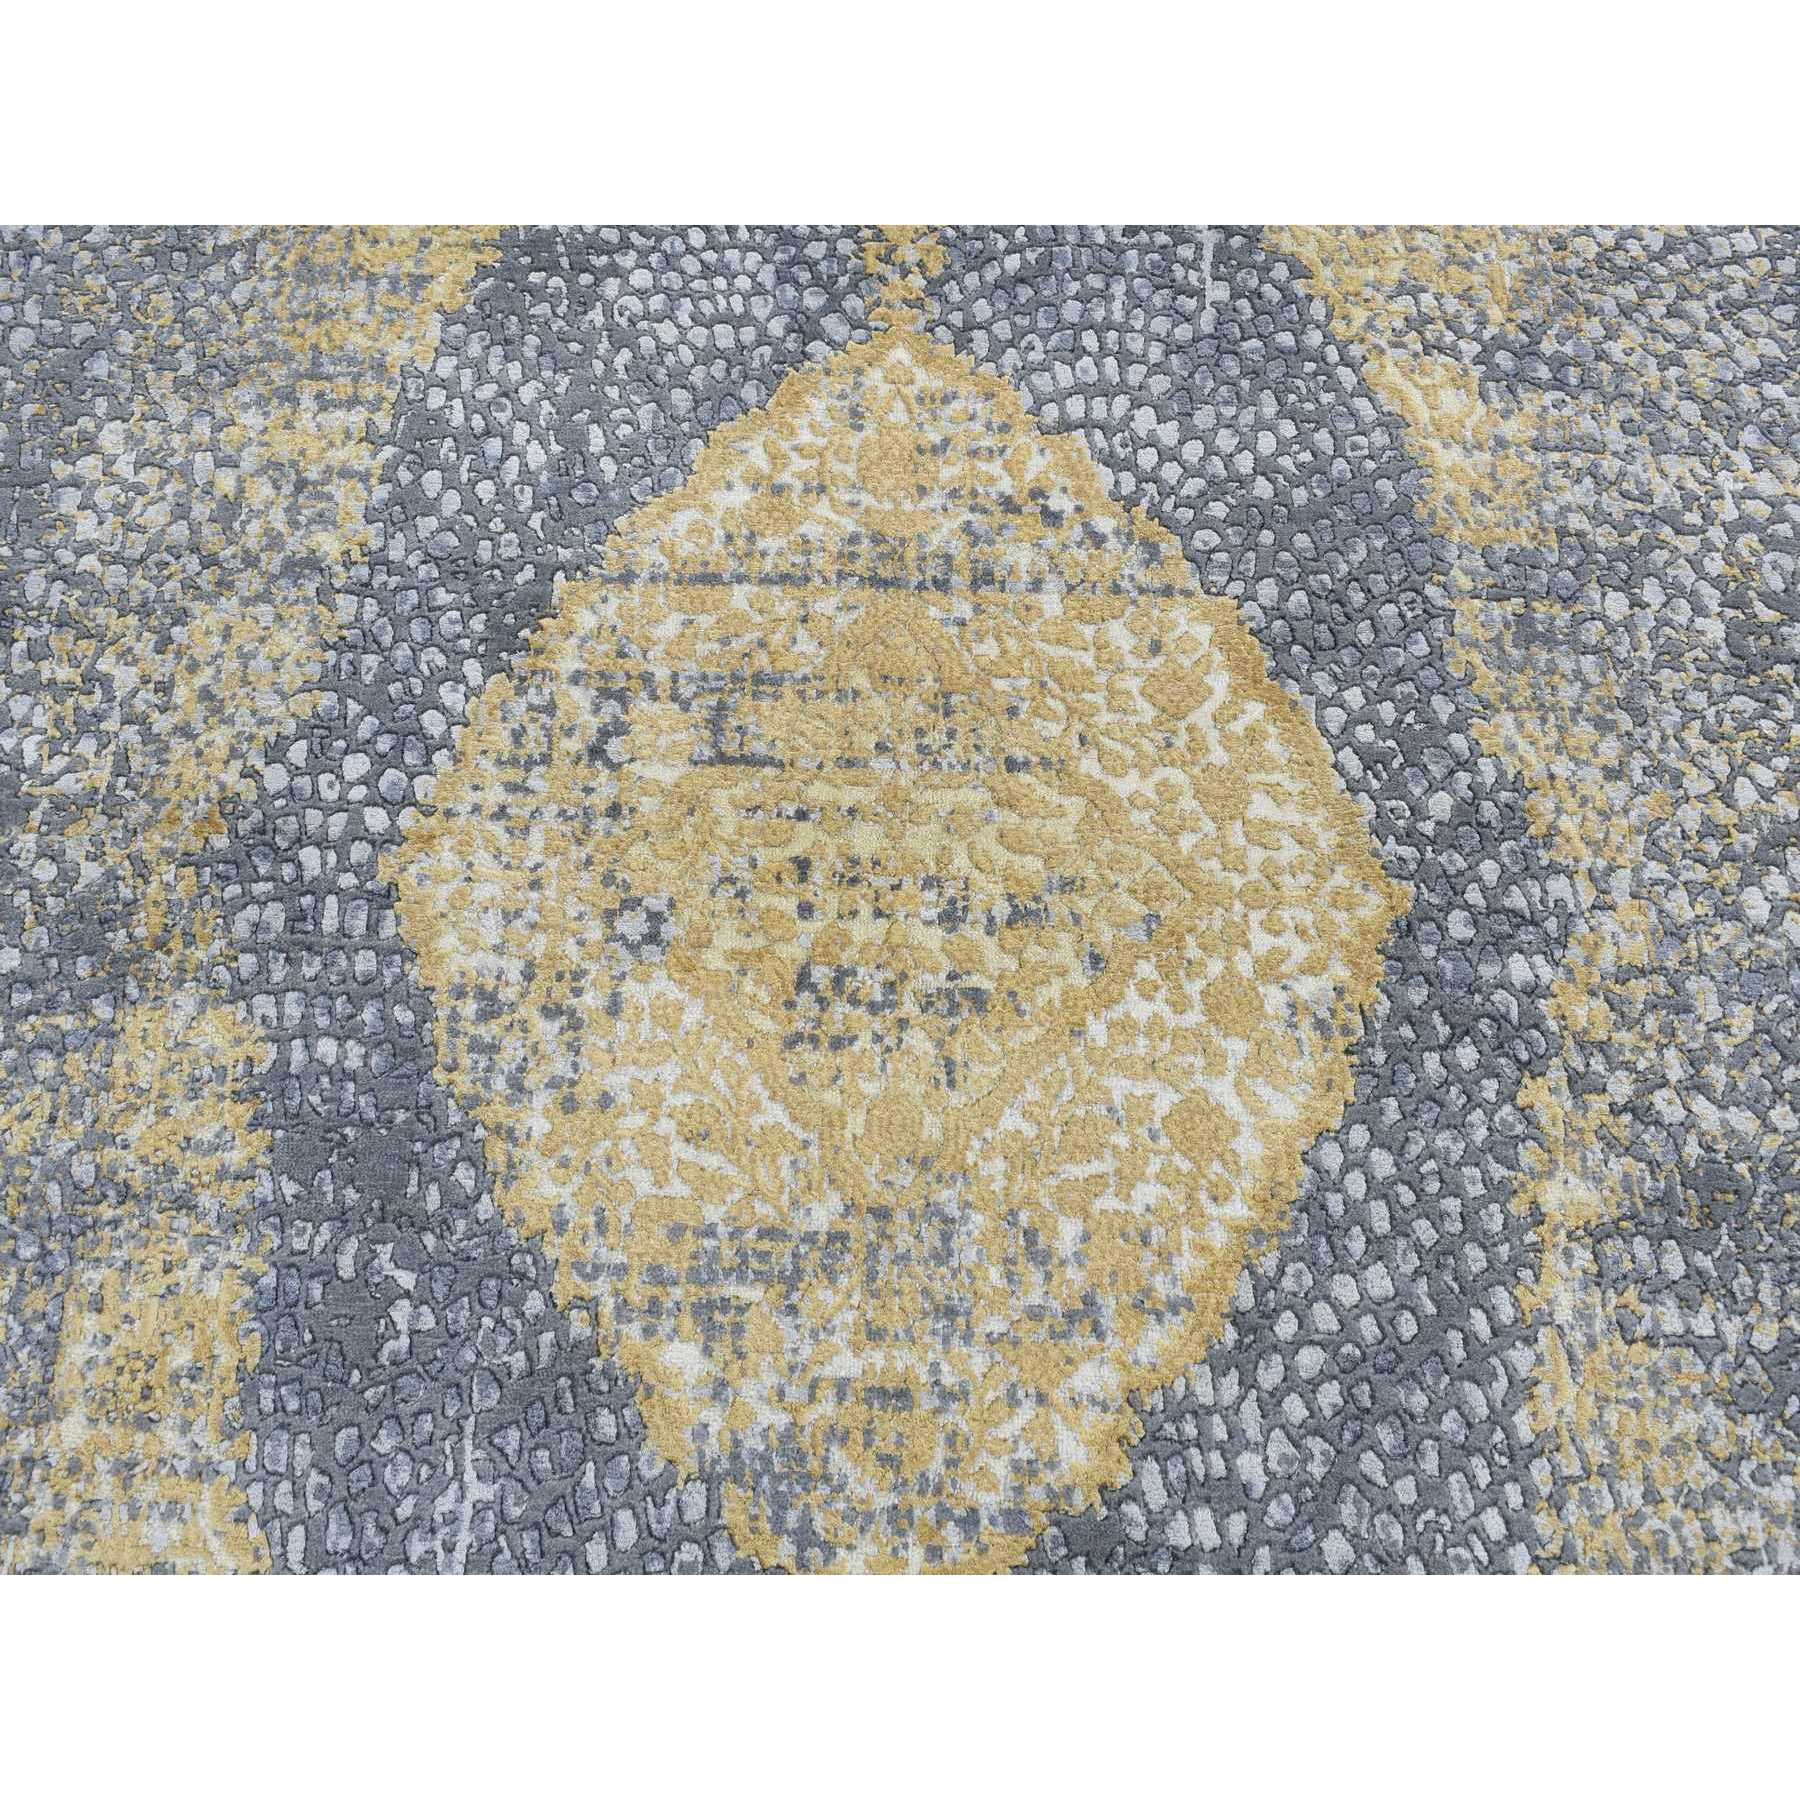 5'2"x7' Carbon Gray with Mix of Gold, Persian Medallion Design, Wool and Pure Silk, Hand Woven, Oriental Rug 